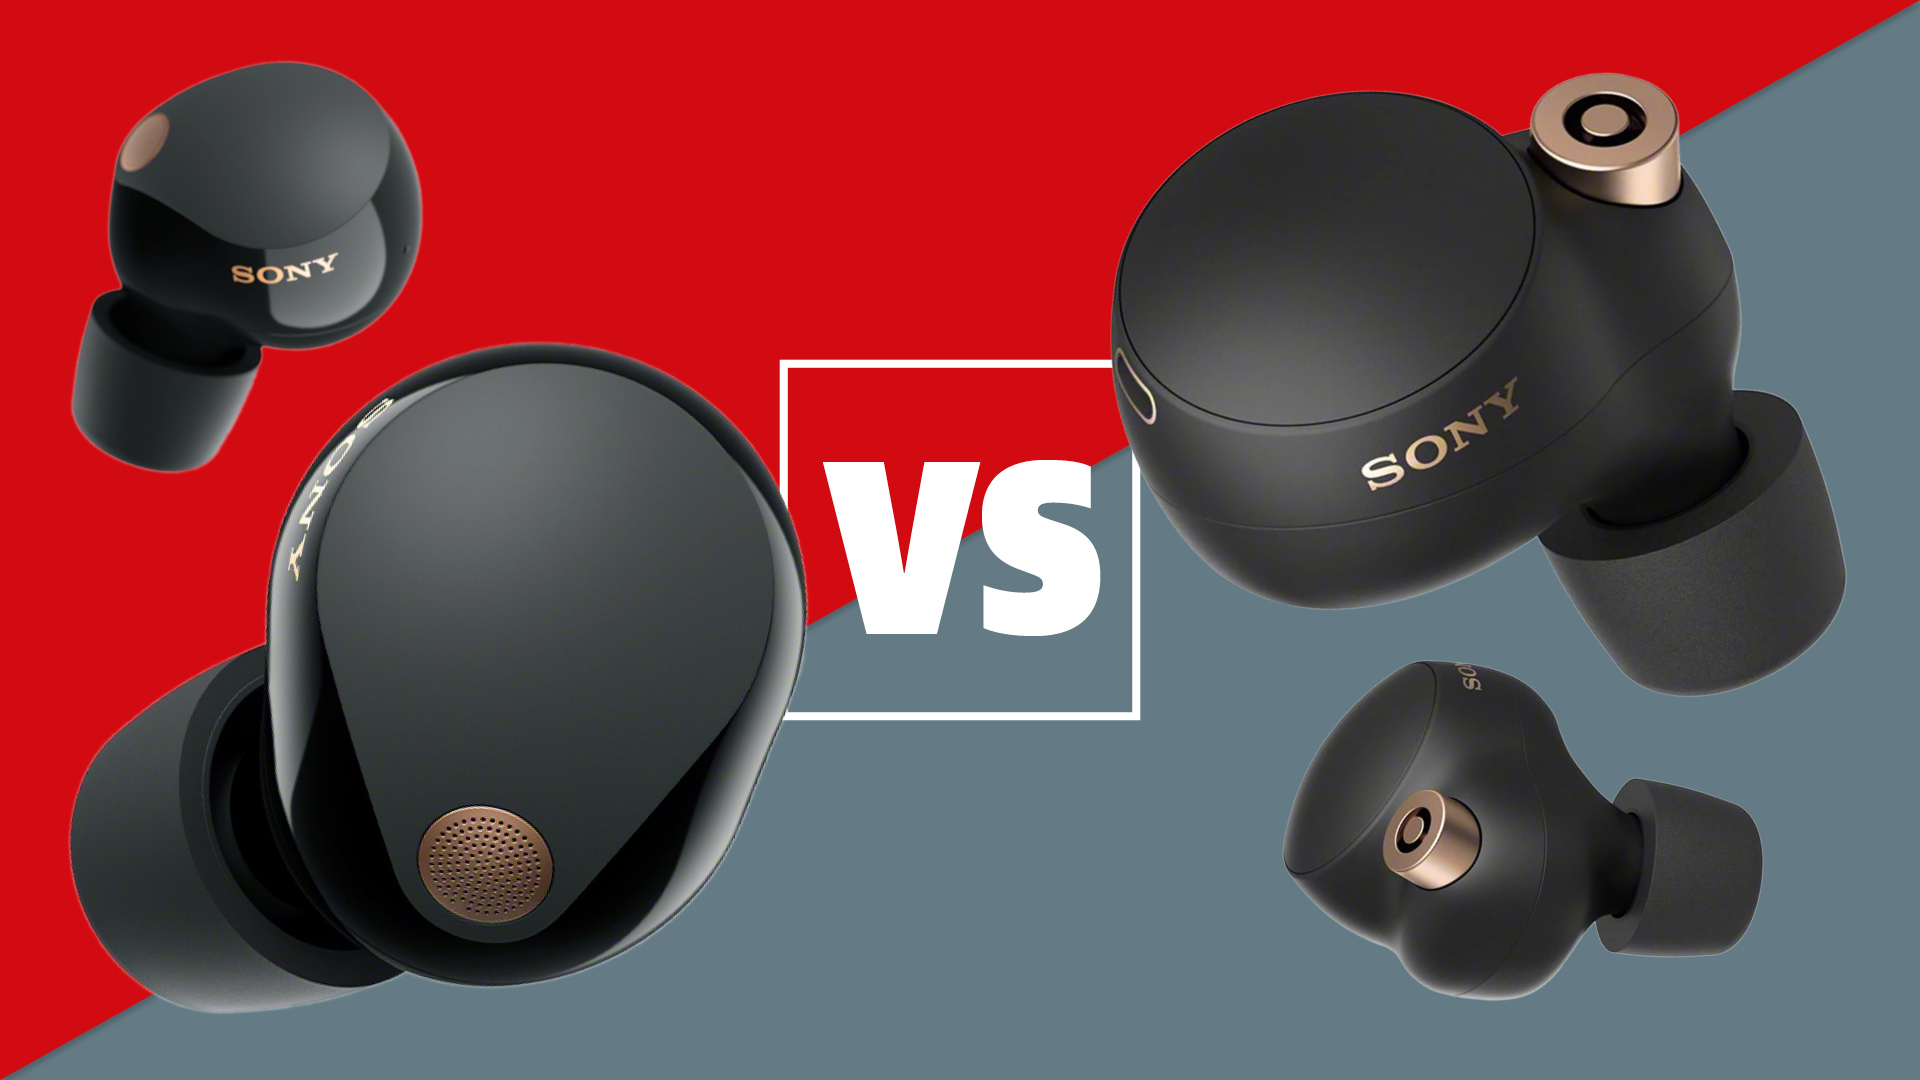 Sony WF-1000XM5 vs WF-1000XM4: which noise-cancelling earbuds are best?